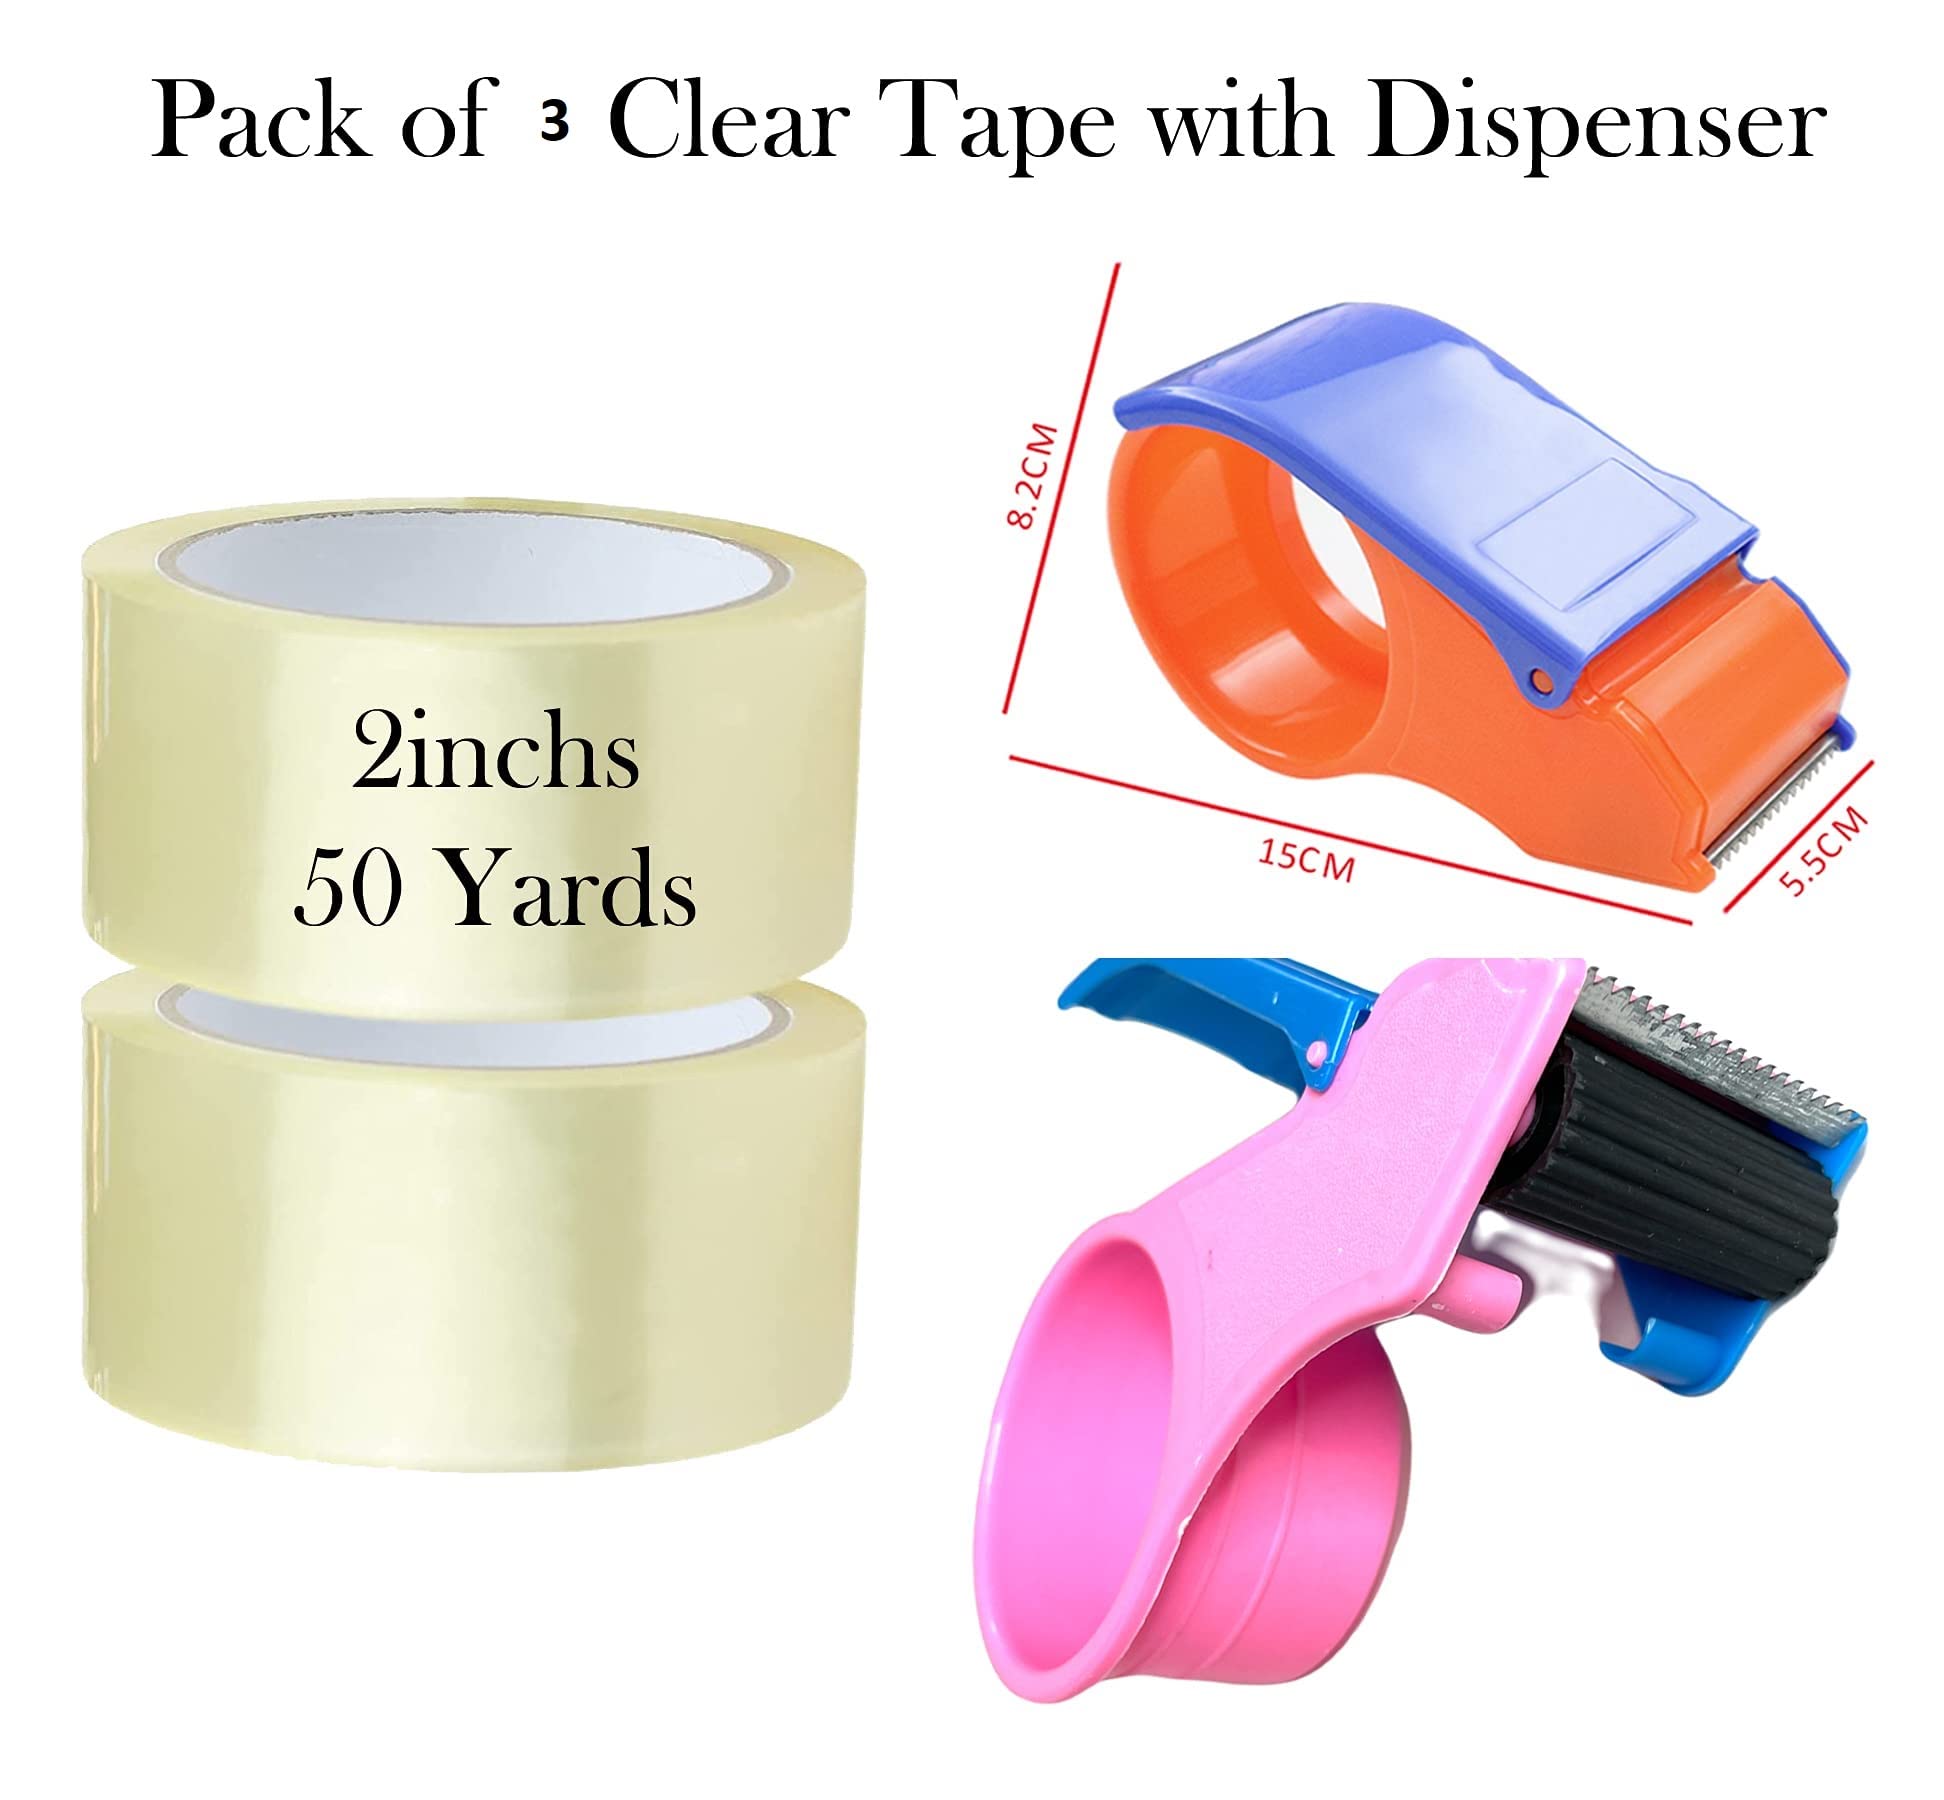 VIO Packing Tape with Dispenser, Pack of 3 Rolls, Easy-Mount Tape Packing Packaging Sealing Cutter Handheld, Clear Transparent Tape, For Packaging Sealing Masking Office Tapes (4.8CM x 50Cm)